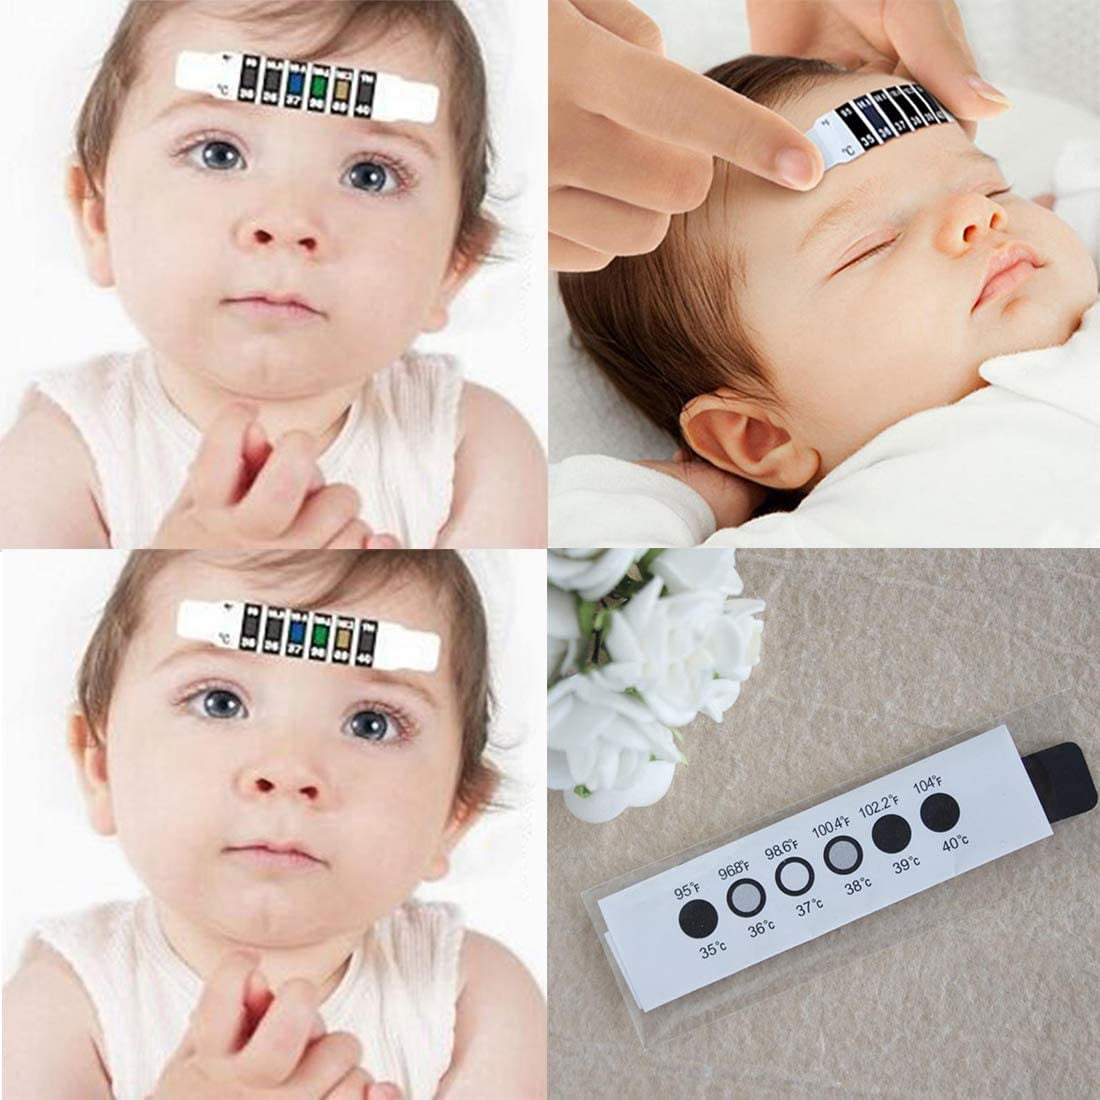 10 Pcs Forehead Thermometer Strips Great for Checking Fever Temp of Babies  Kids Travel Thermometer Celsius & Fahrenheit 